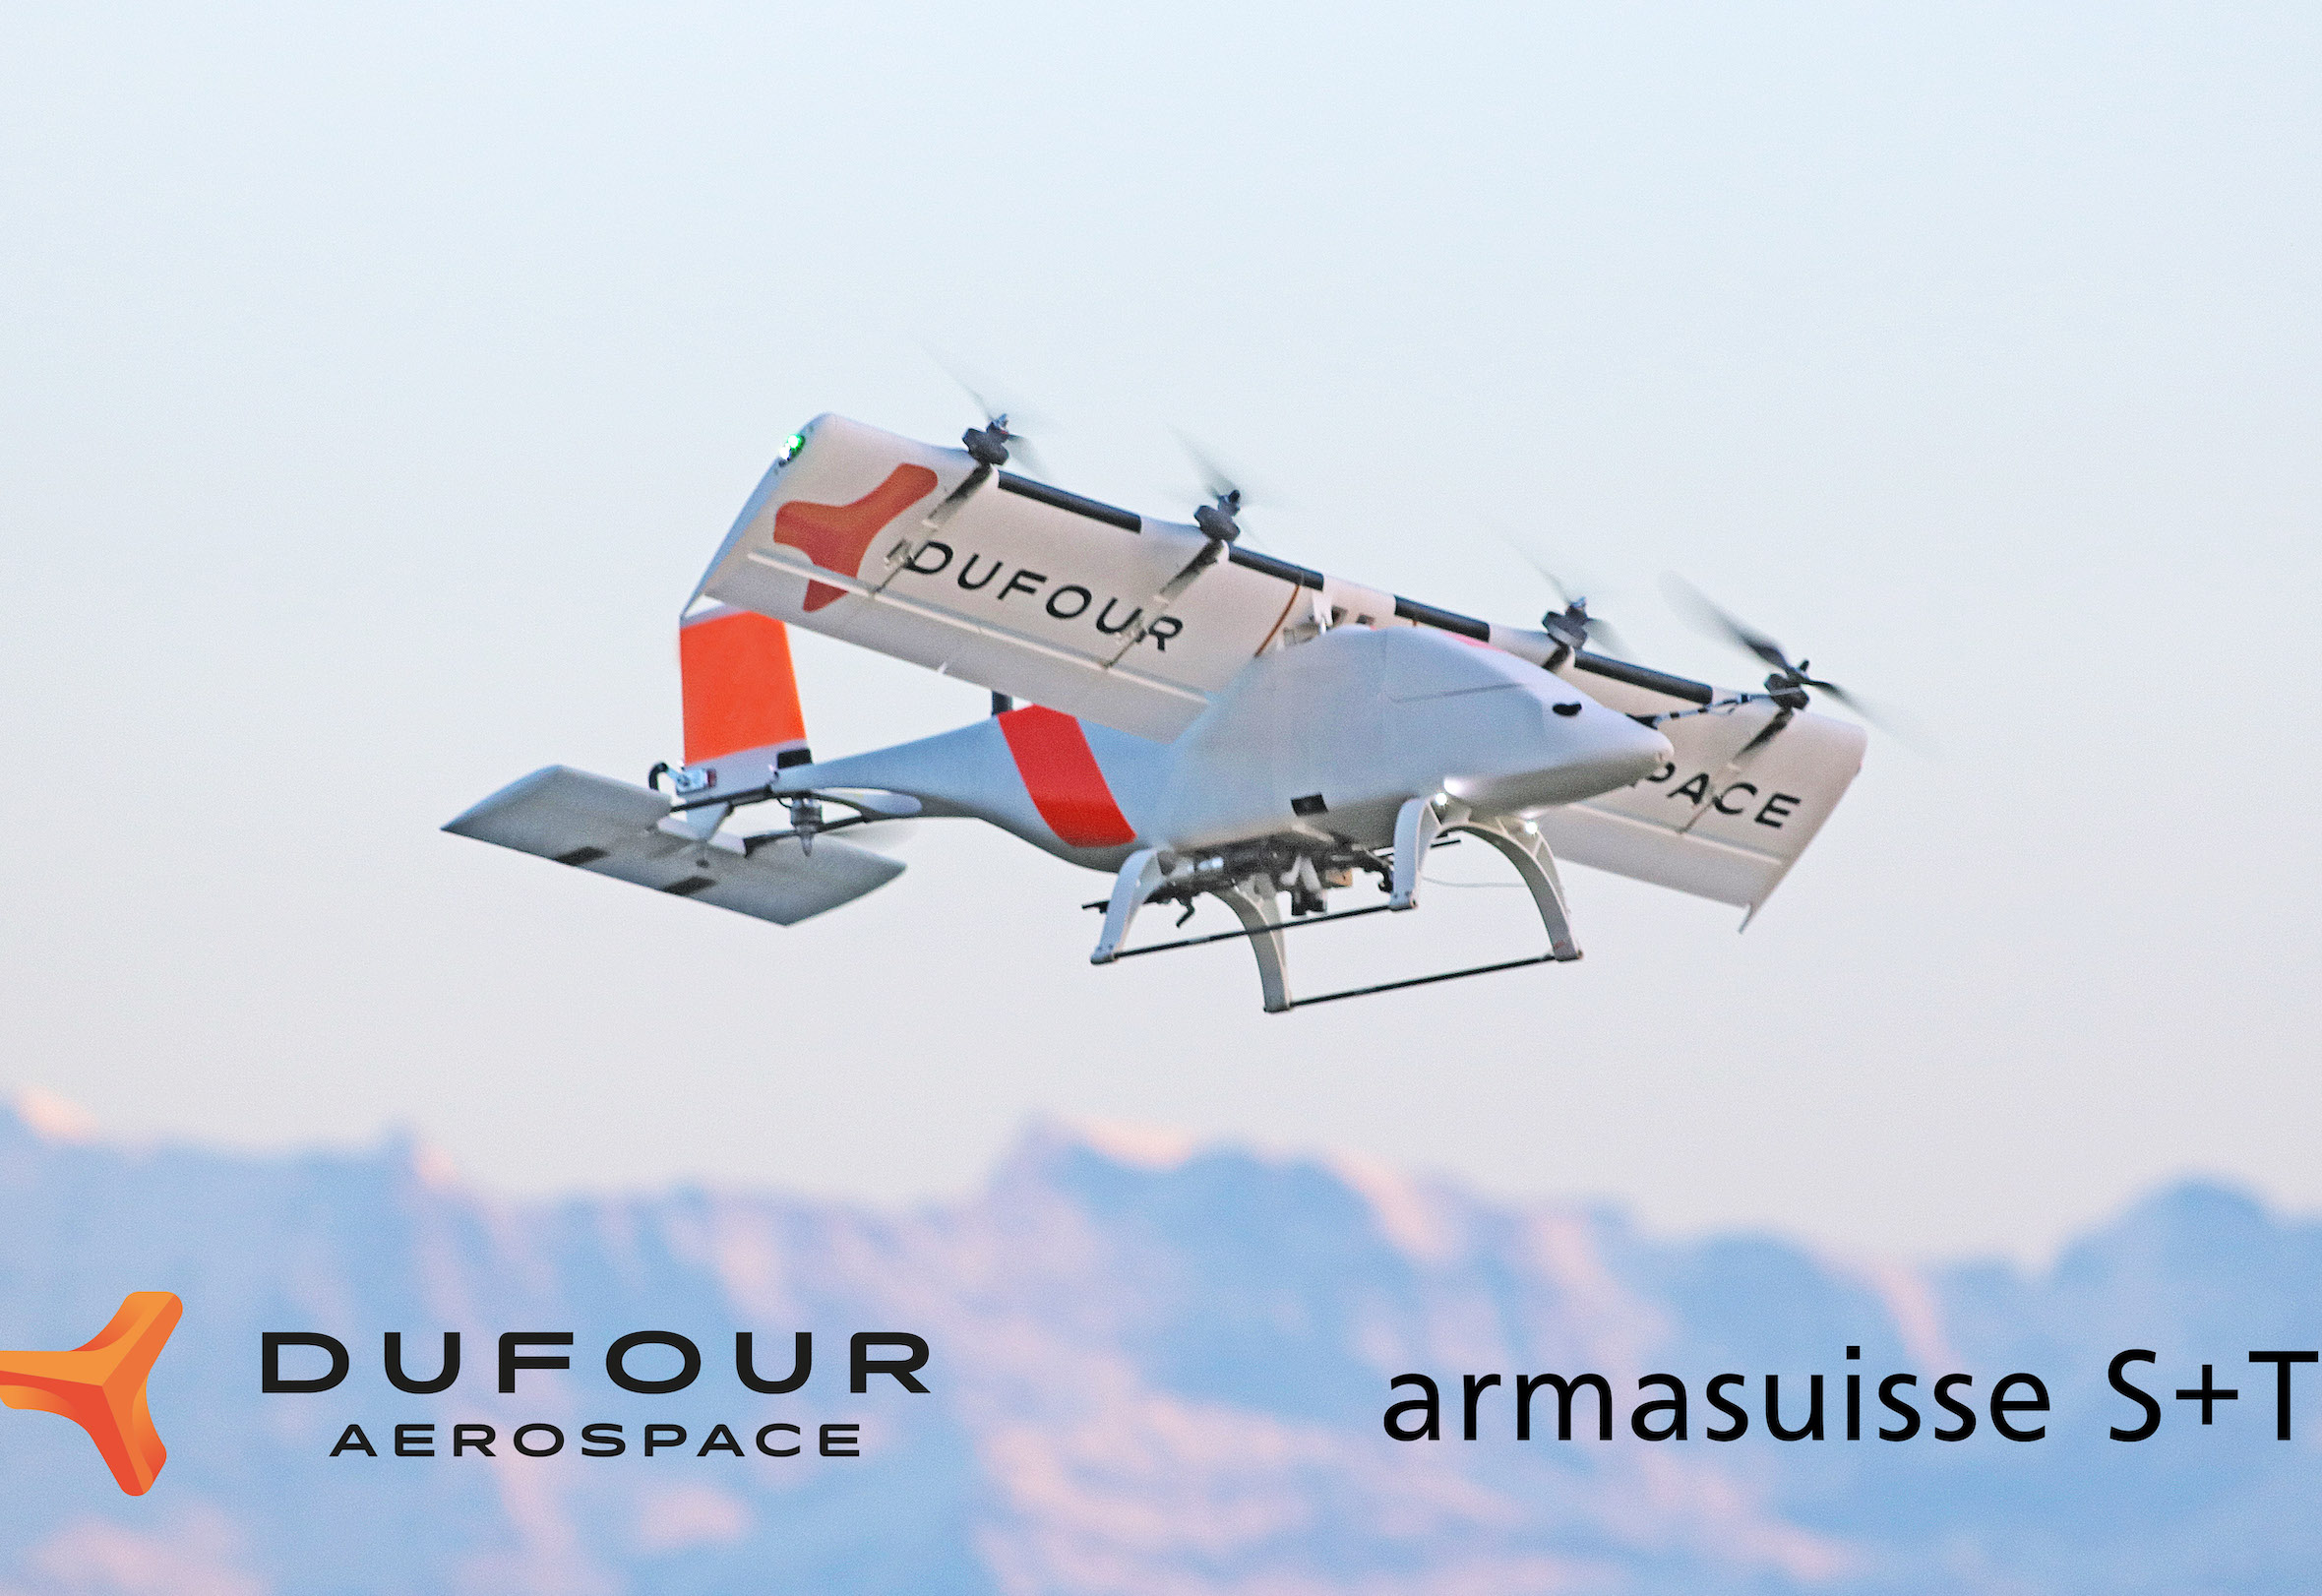 This partnership between Dufour Aerospace and armasuisse underlines the rising significance of tilt-wing aircraft in security and defence scenarios.